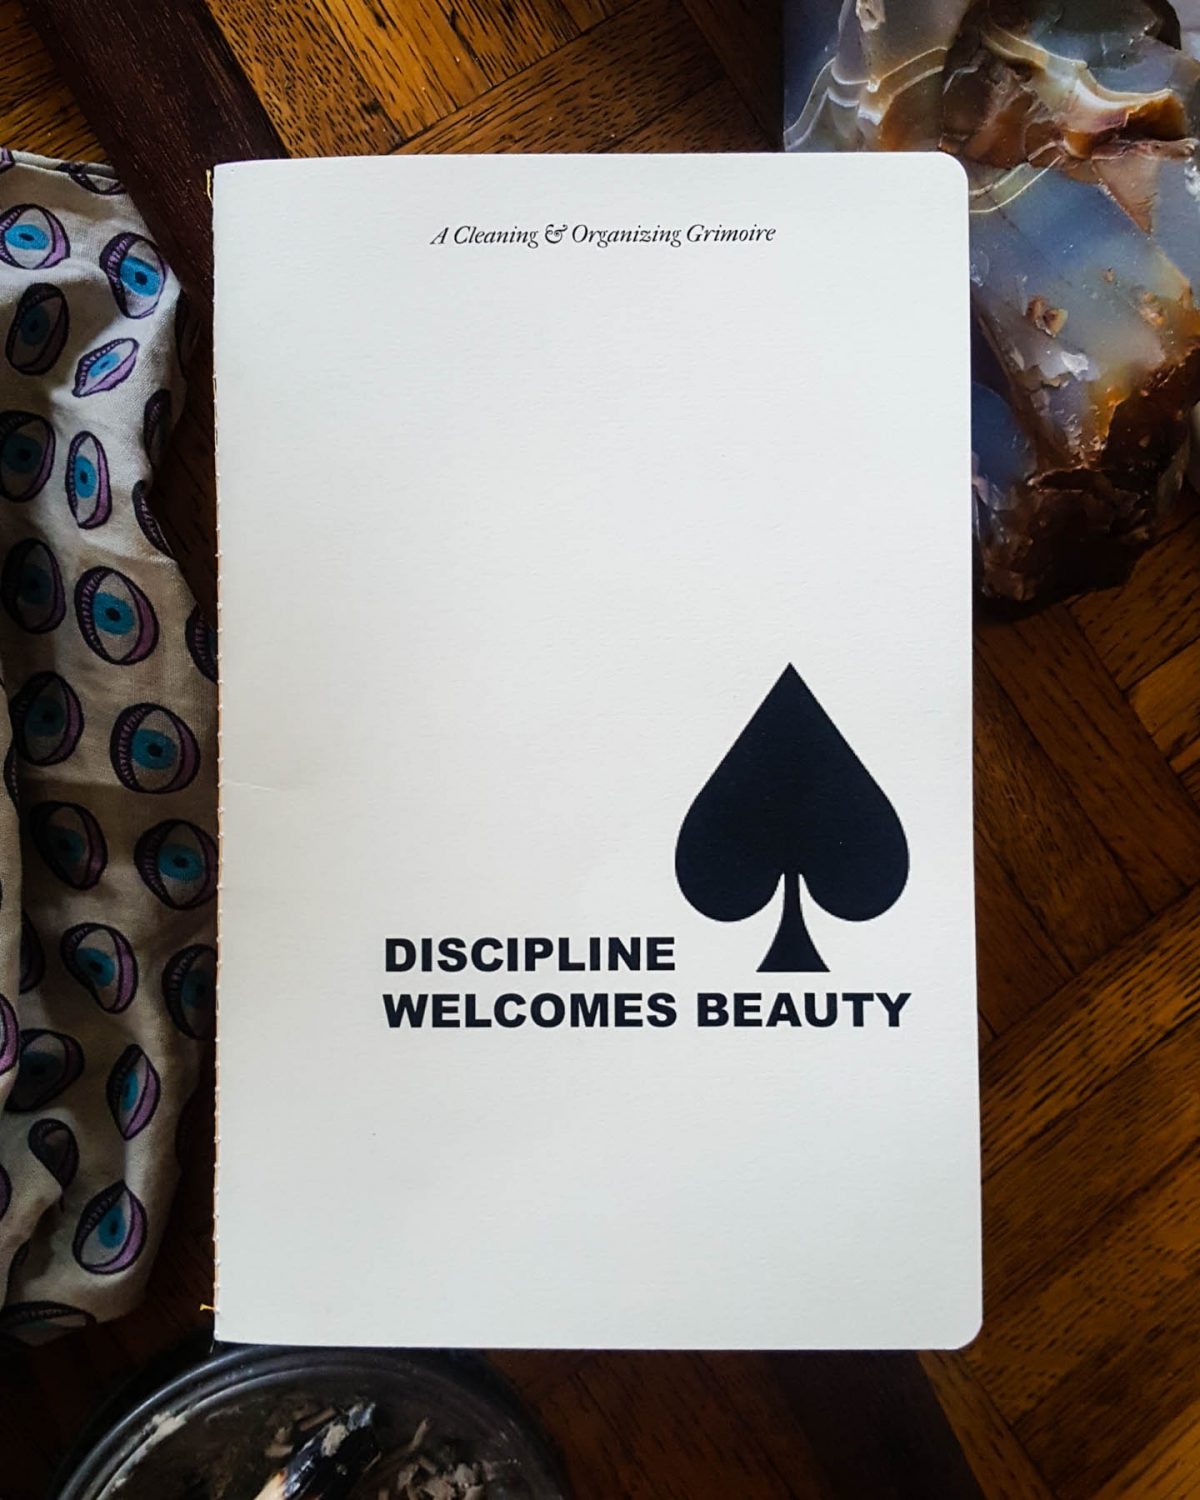 Discipline Welcomes Beauty ~ A Cleaning & Organizing Grimoire